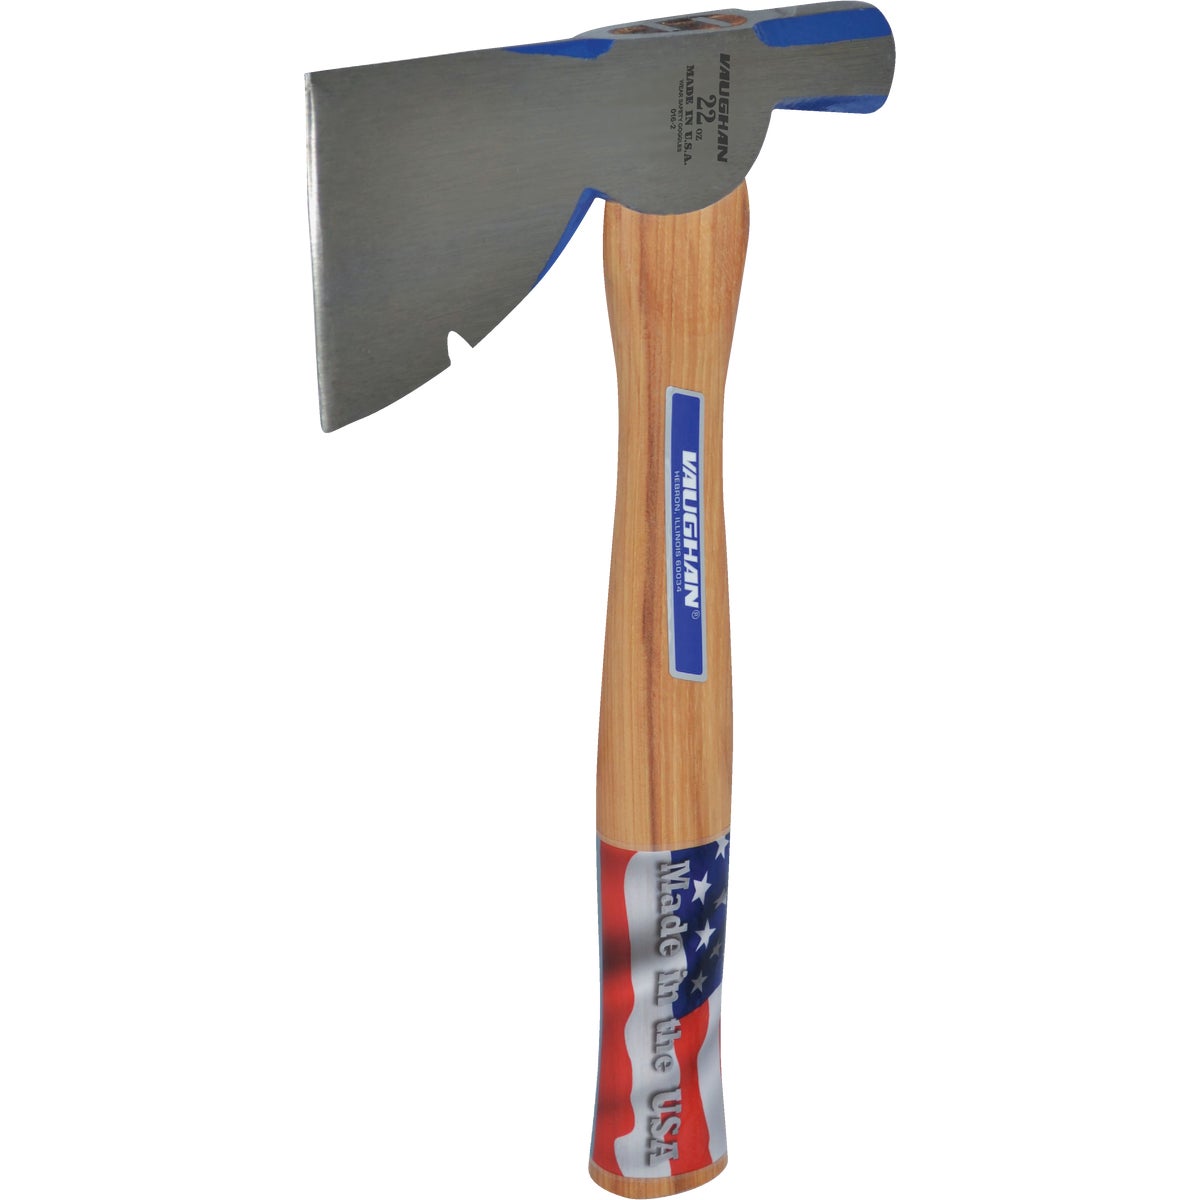 Item 368539, Full polished lead with 3-1/2" cut. Flame-treated hickory handle.